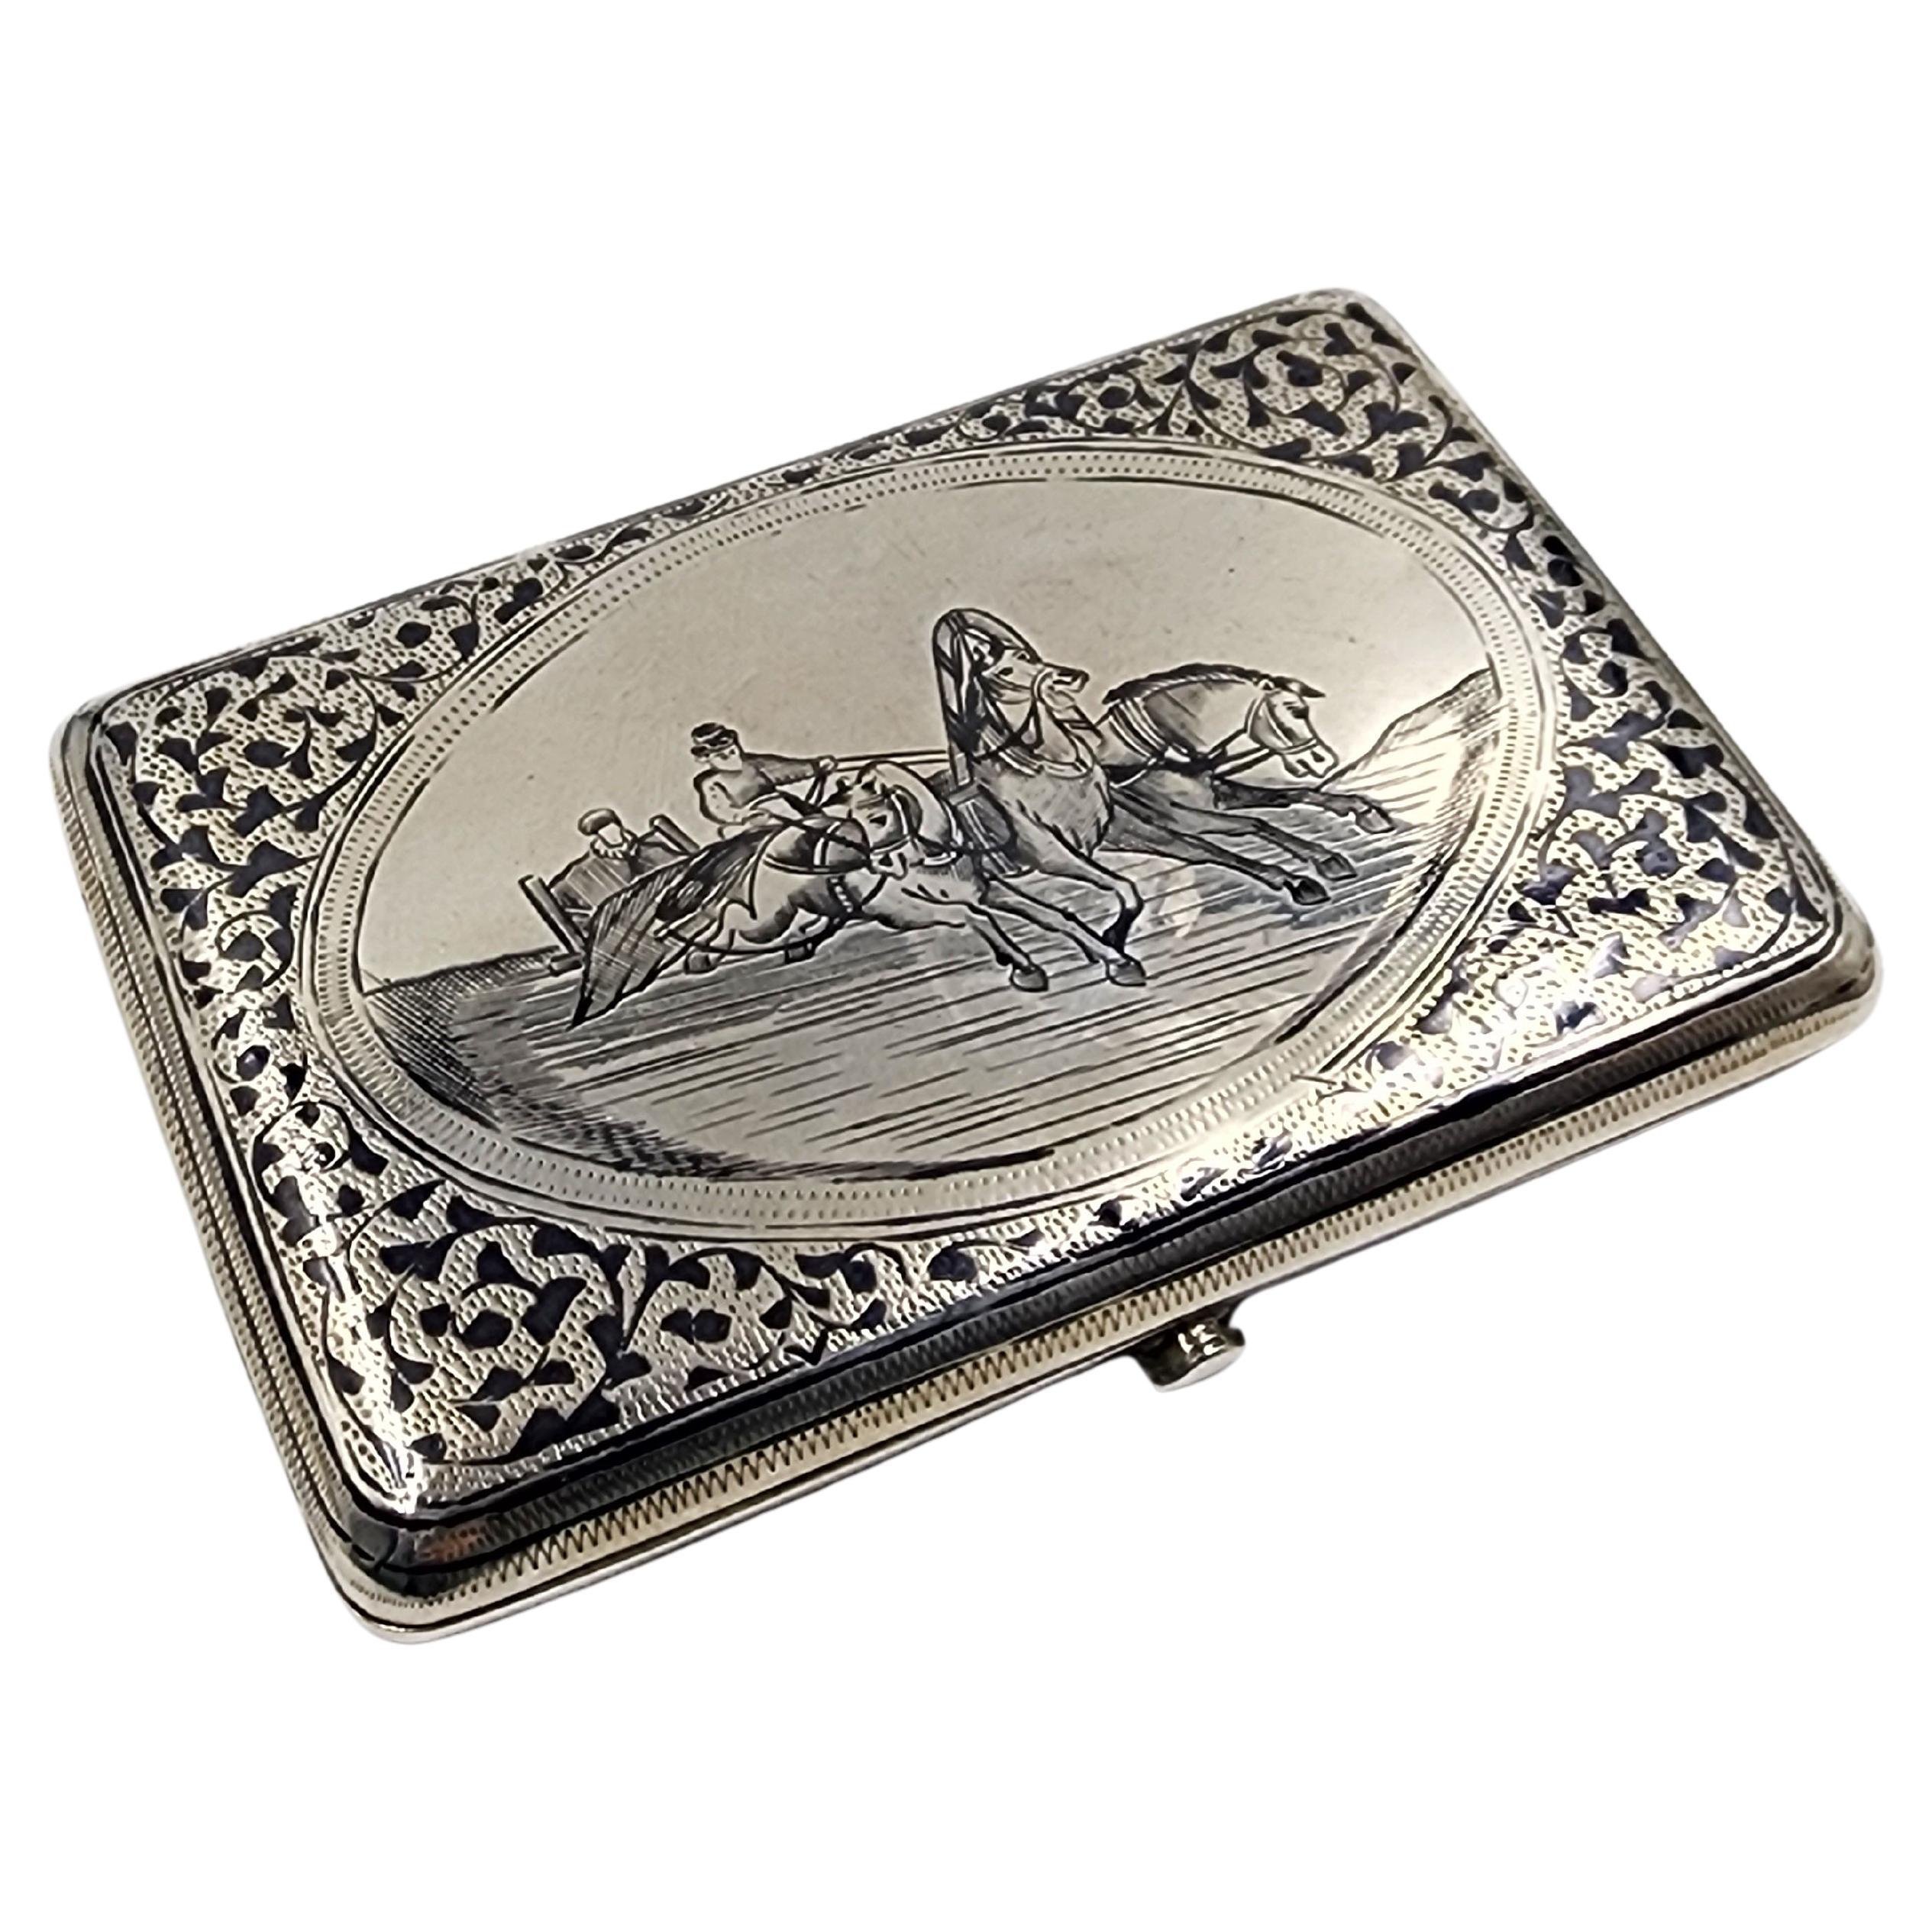 19th Century Russian silver and nickel plated tobacco box "sultan on horseback"